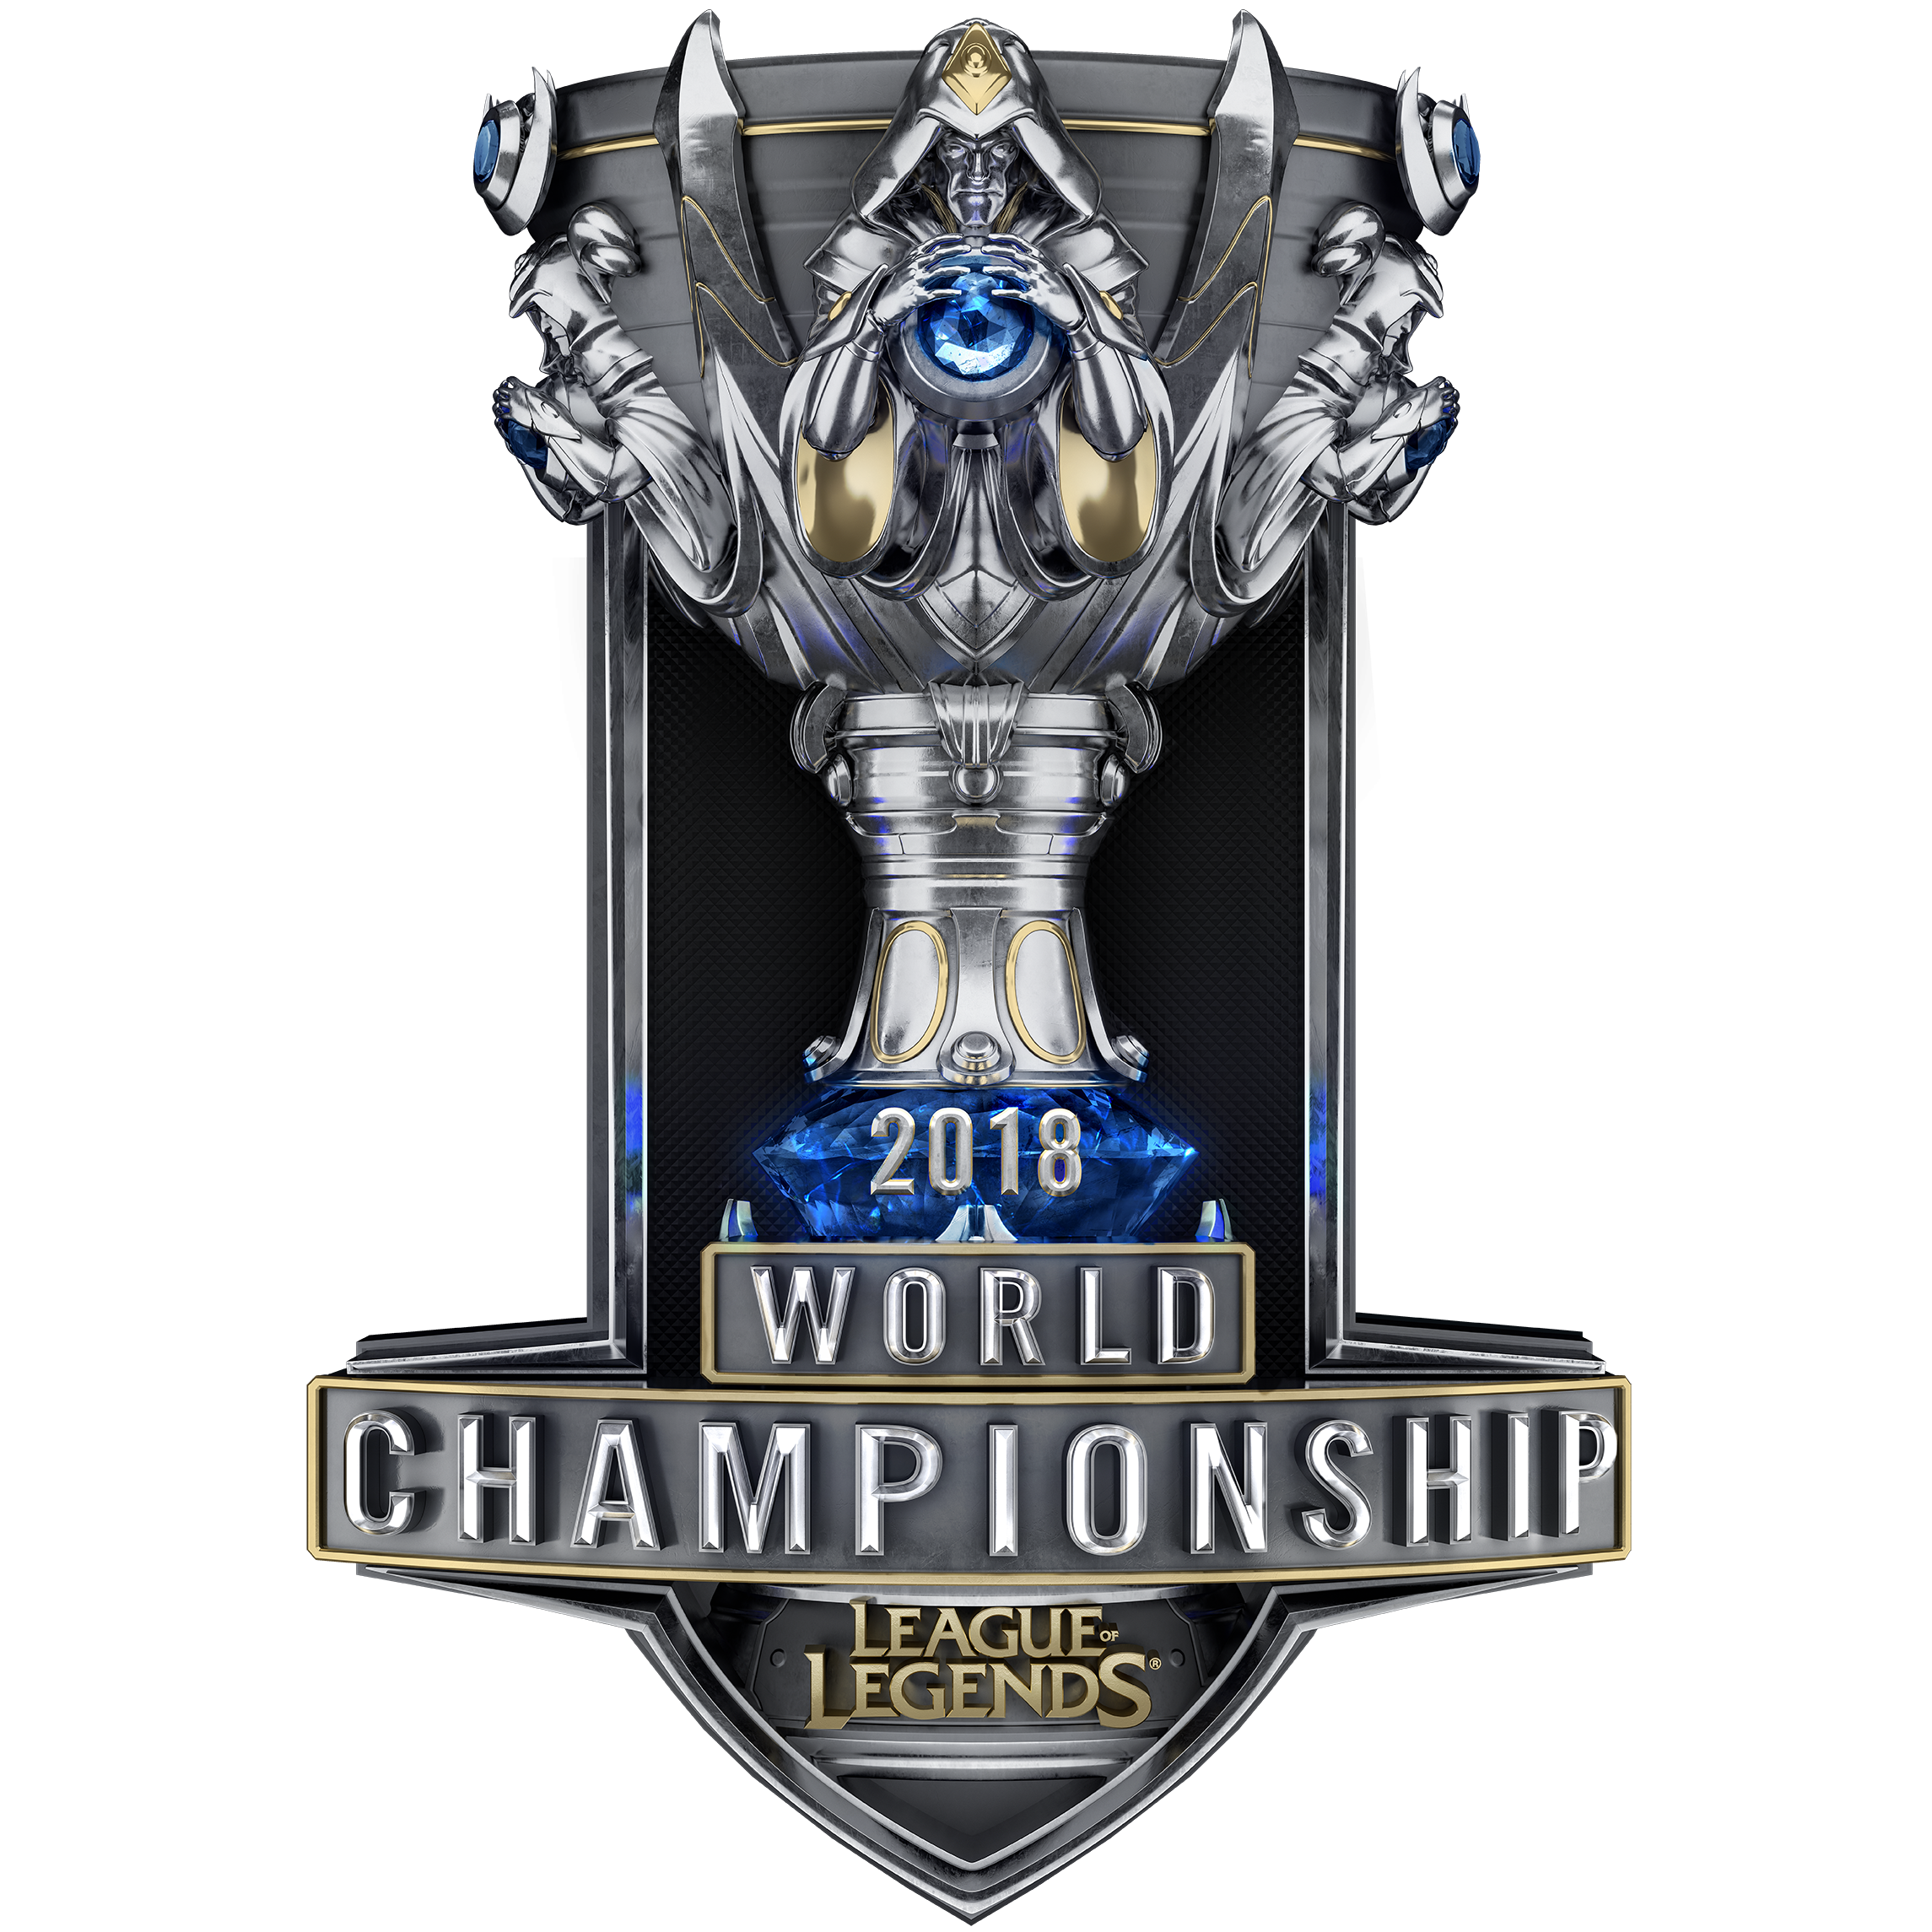 LoL Worlds 2023 Schedule, Venue, Date, Prize Money, New format and